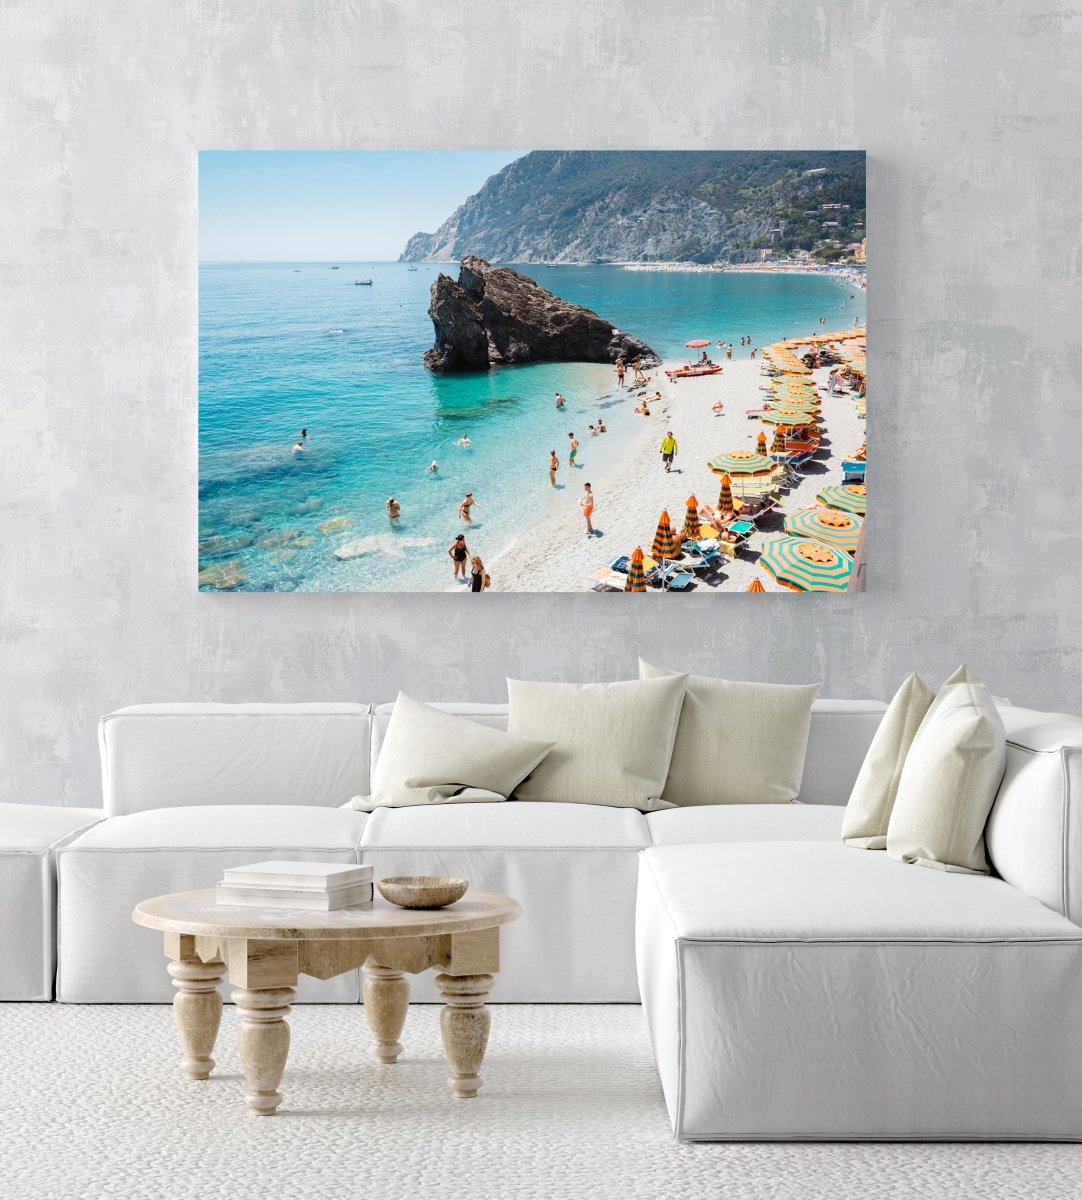 Big rock on Monterosso beach surrounded by people and blue water Cinque Terre in an acrylic/perspex frame